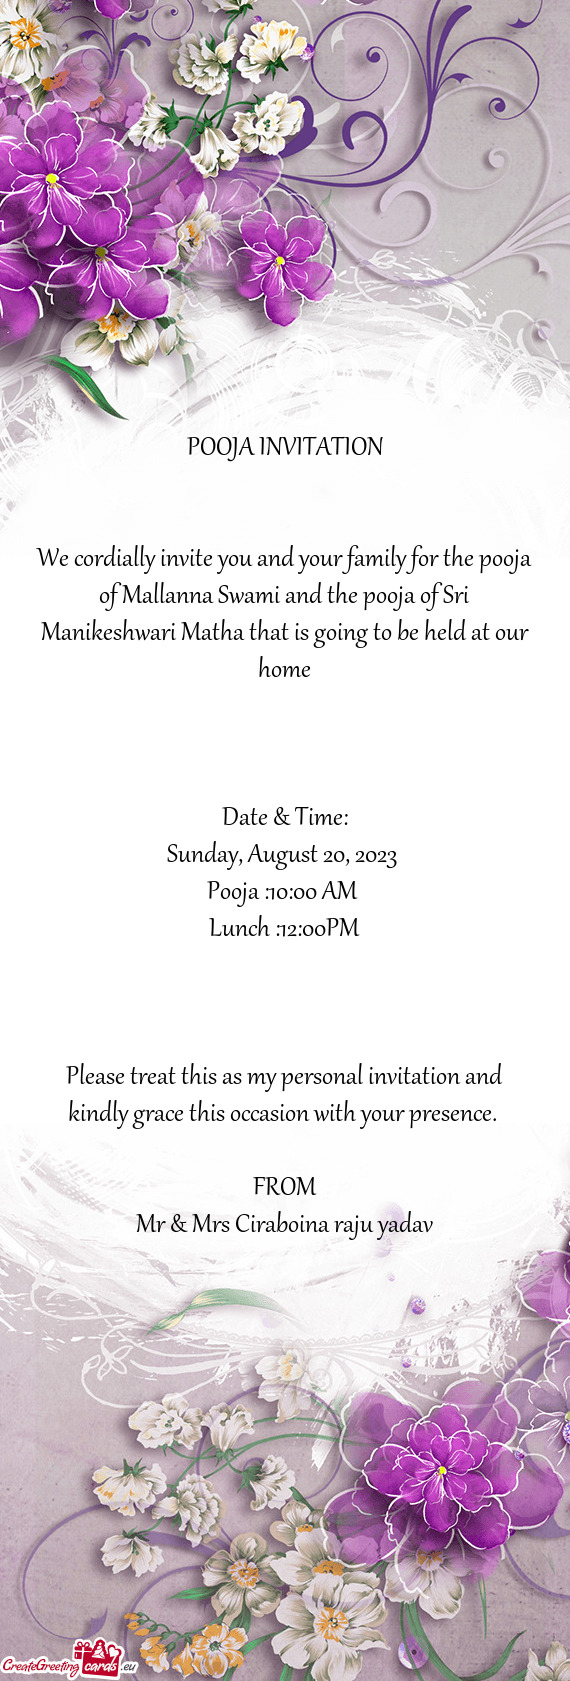 We cordially invite you and your family for the pooja of Mallanna Swami and the pooja of Sri Manikes